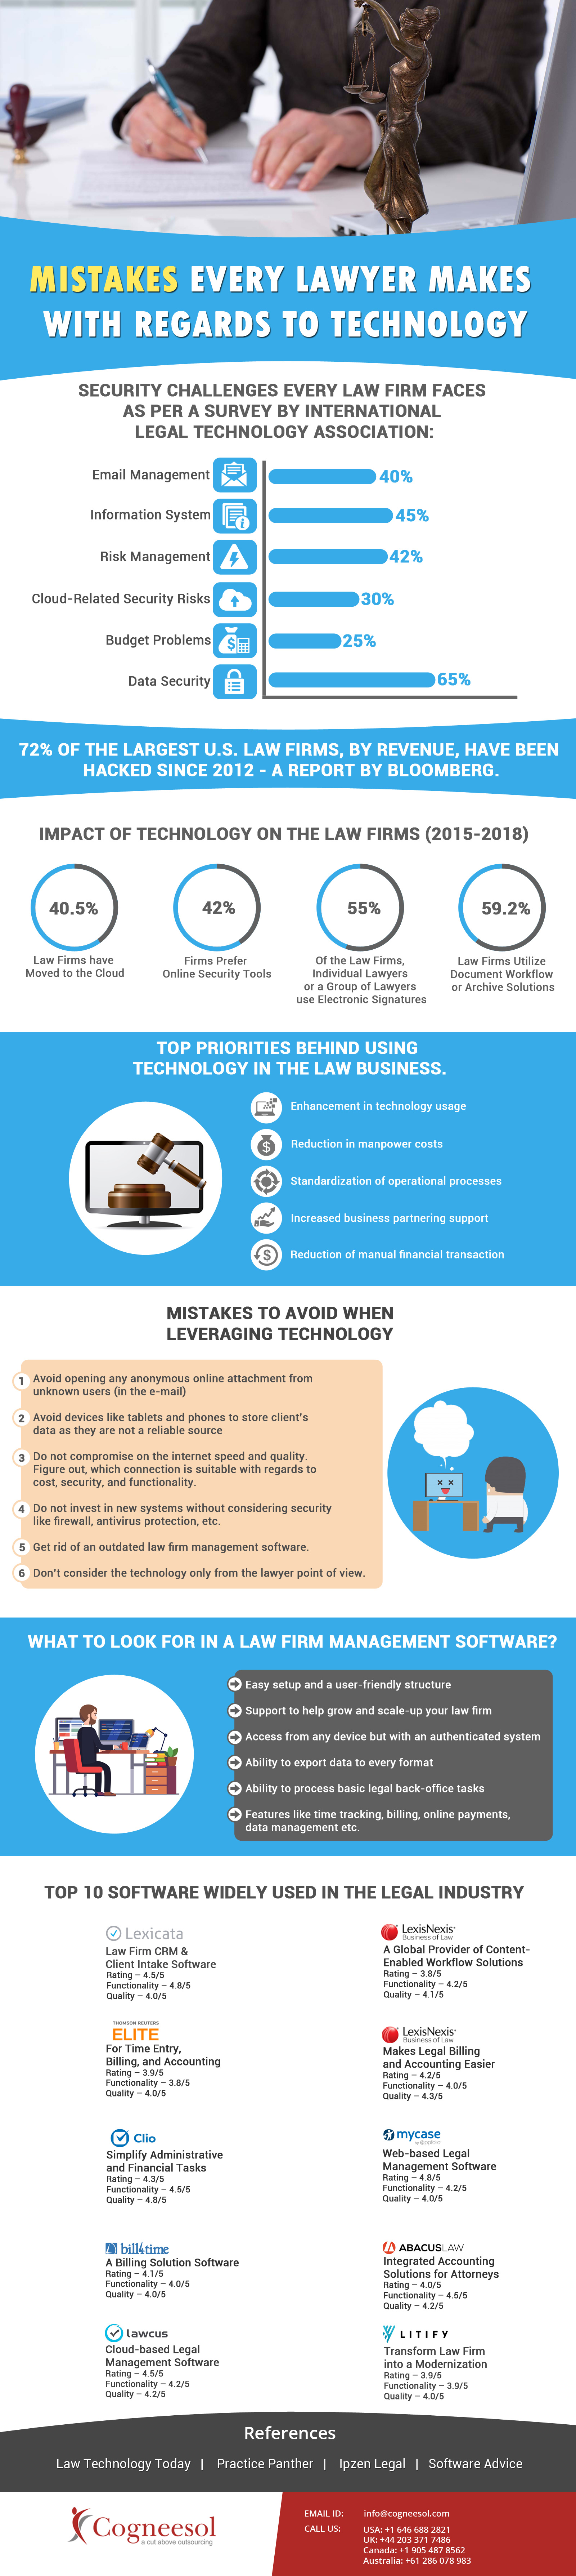 Lawyers Mistakes With Technology